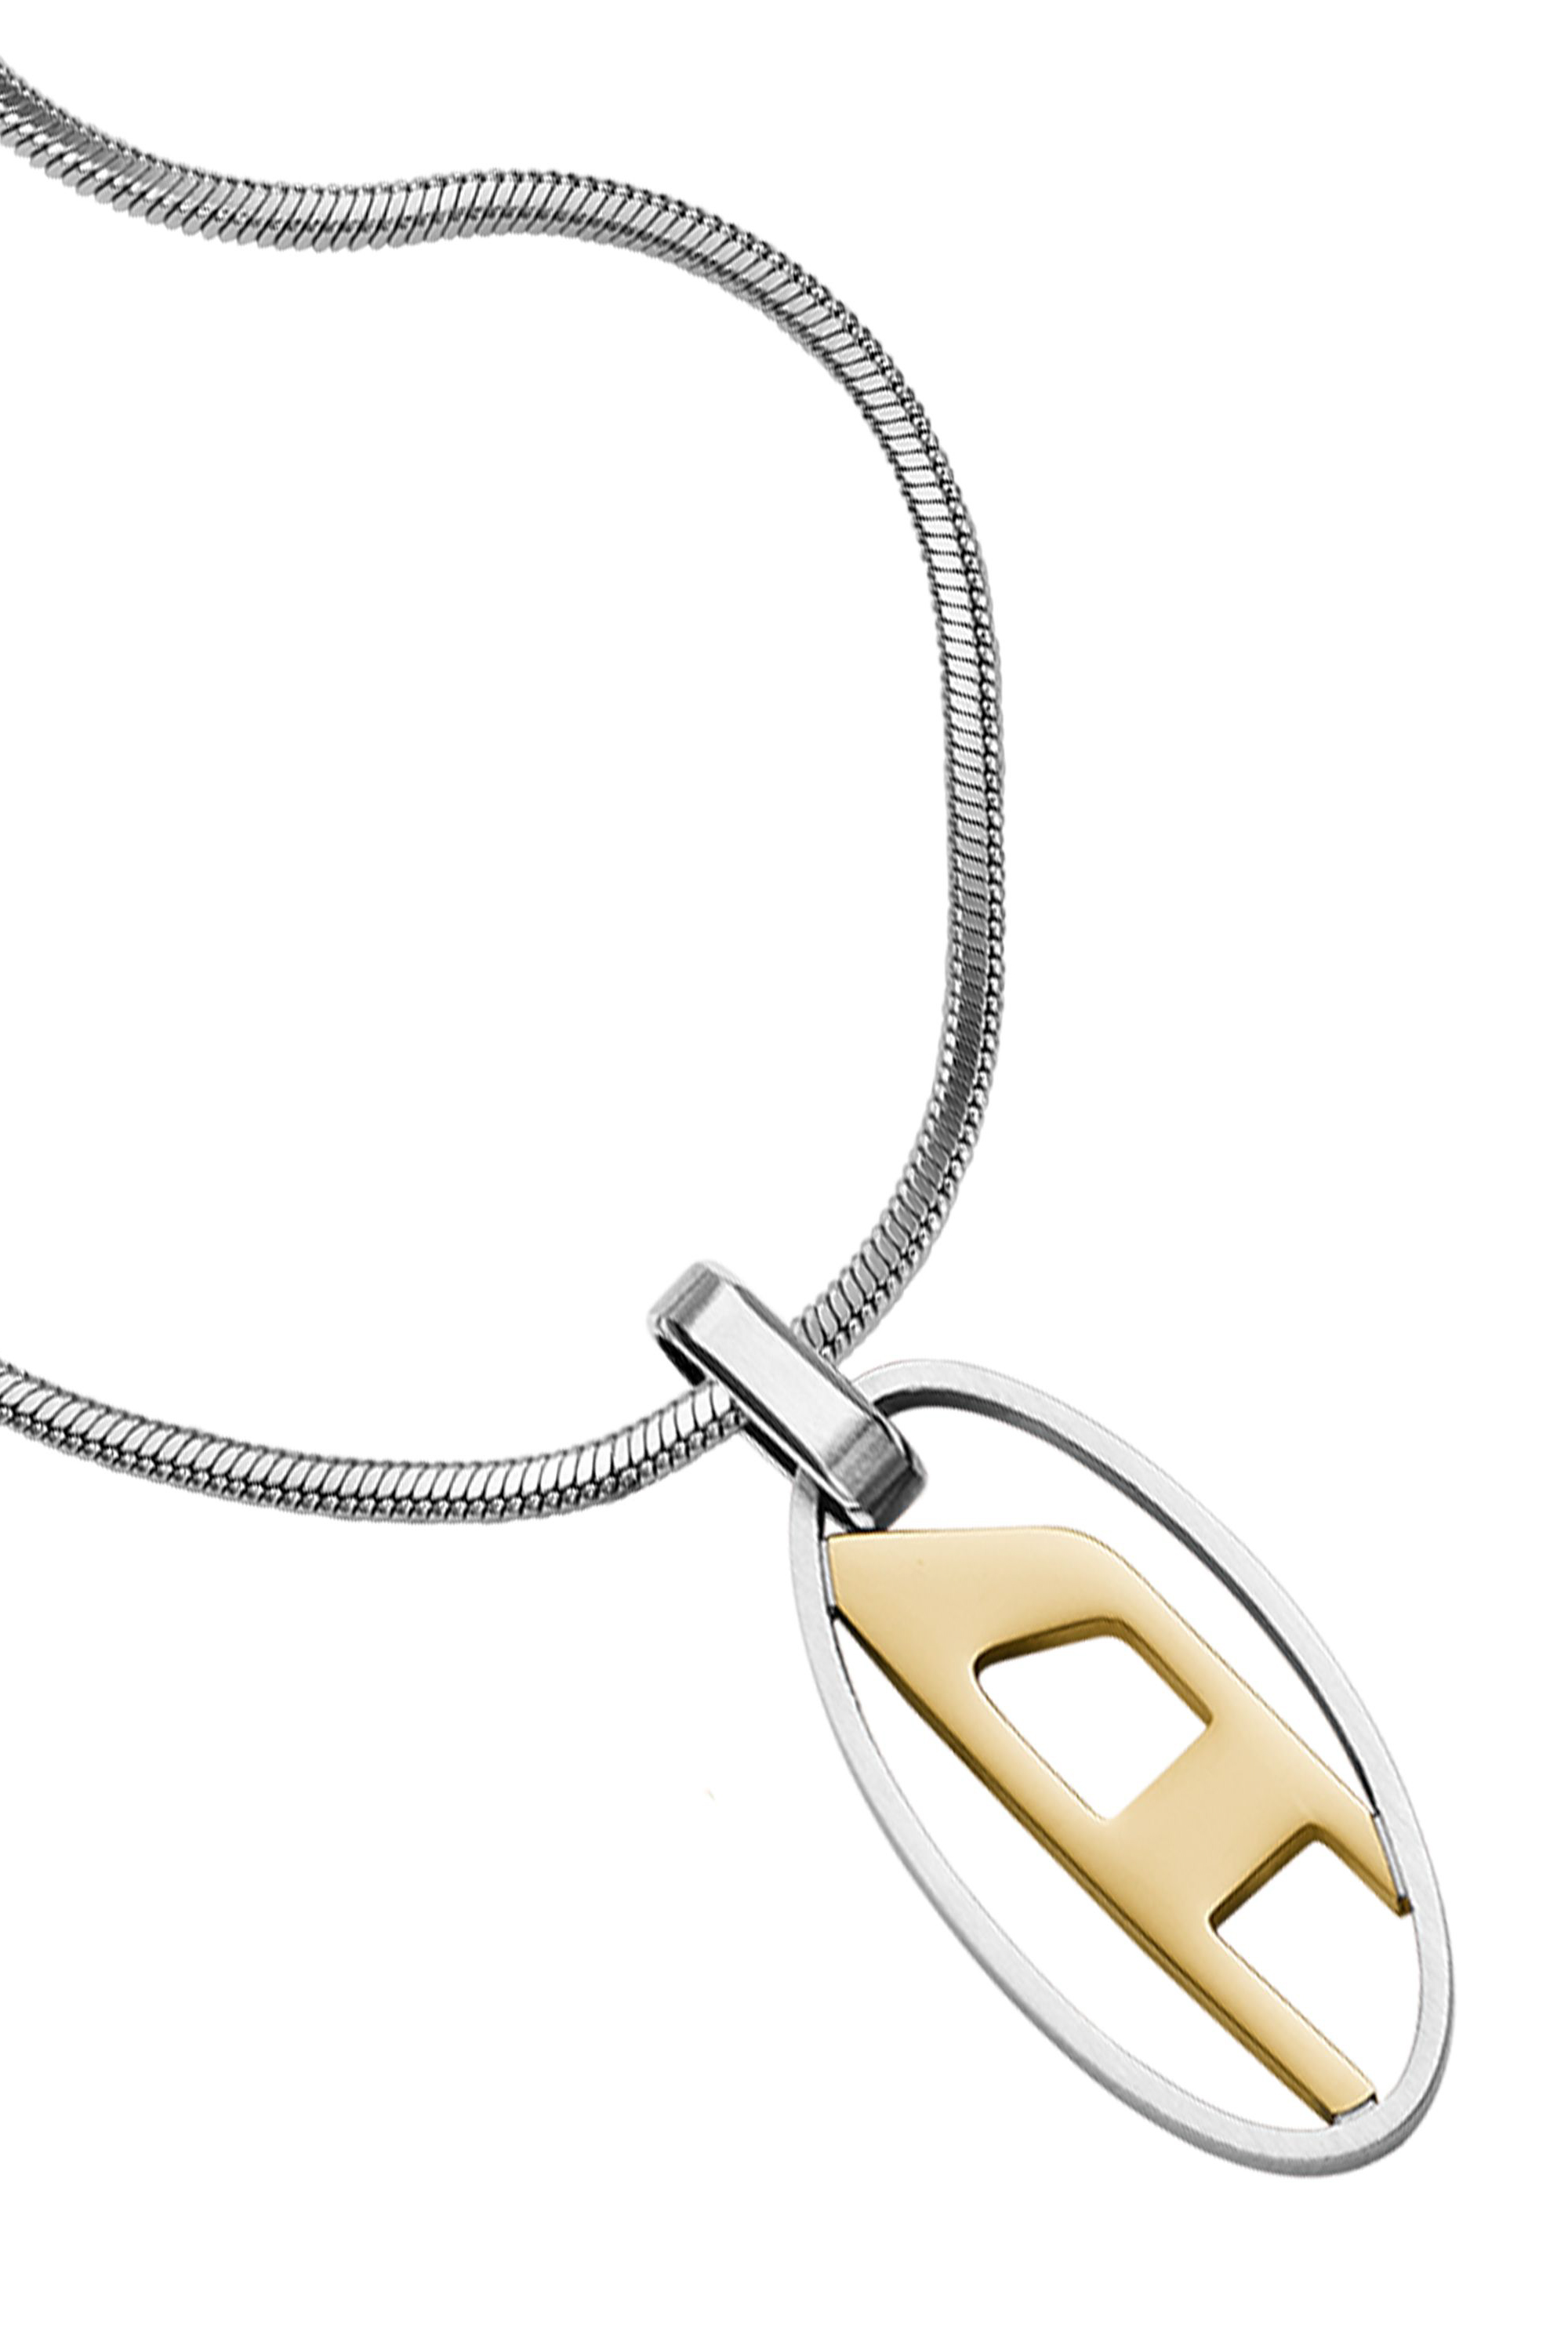 Louis Vuitton LV Wood Necklace Aged Silver in Aged Silver with Aged  Silver-tone - US